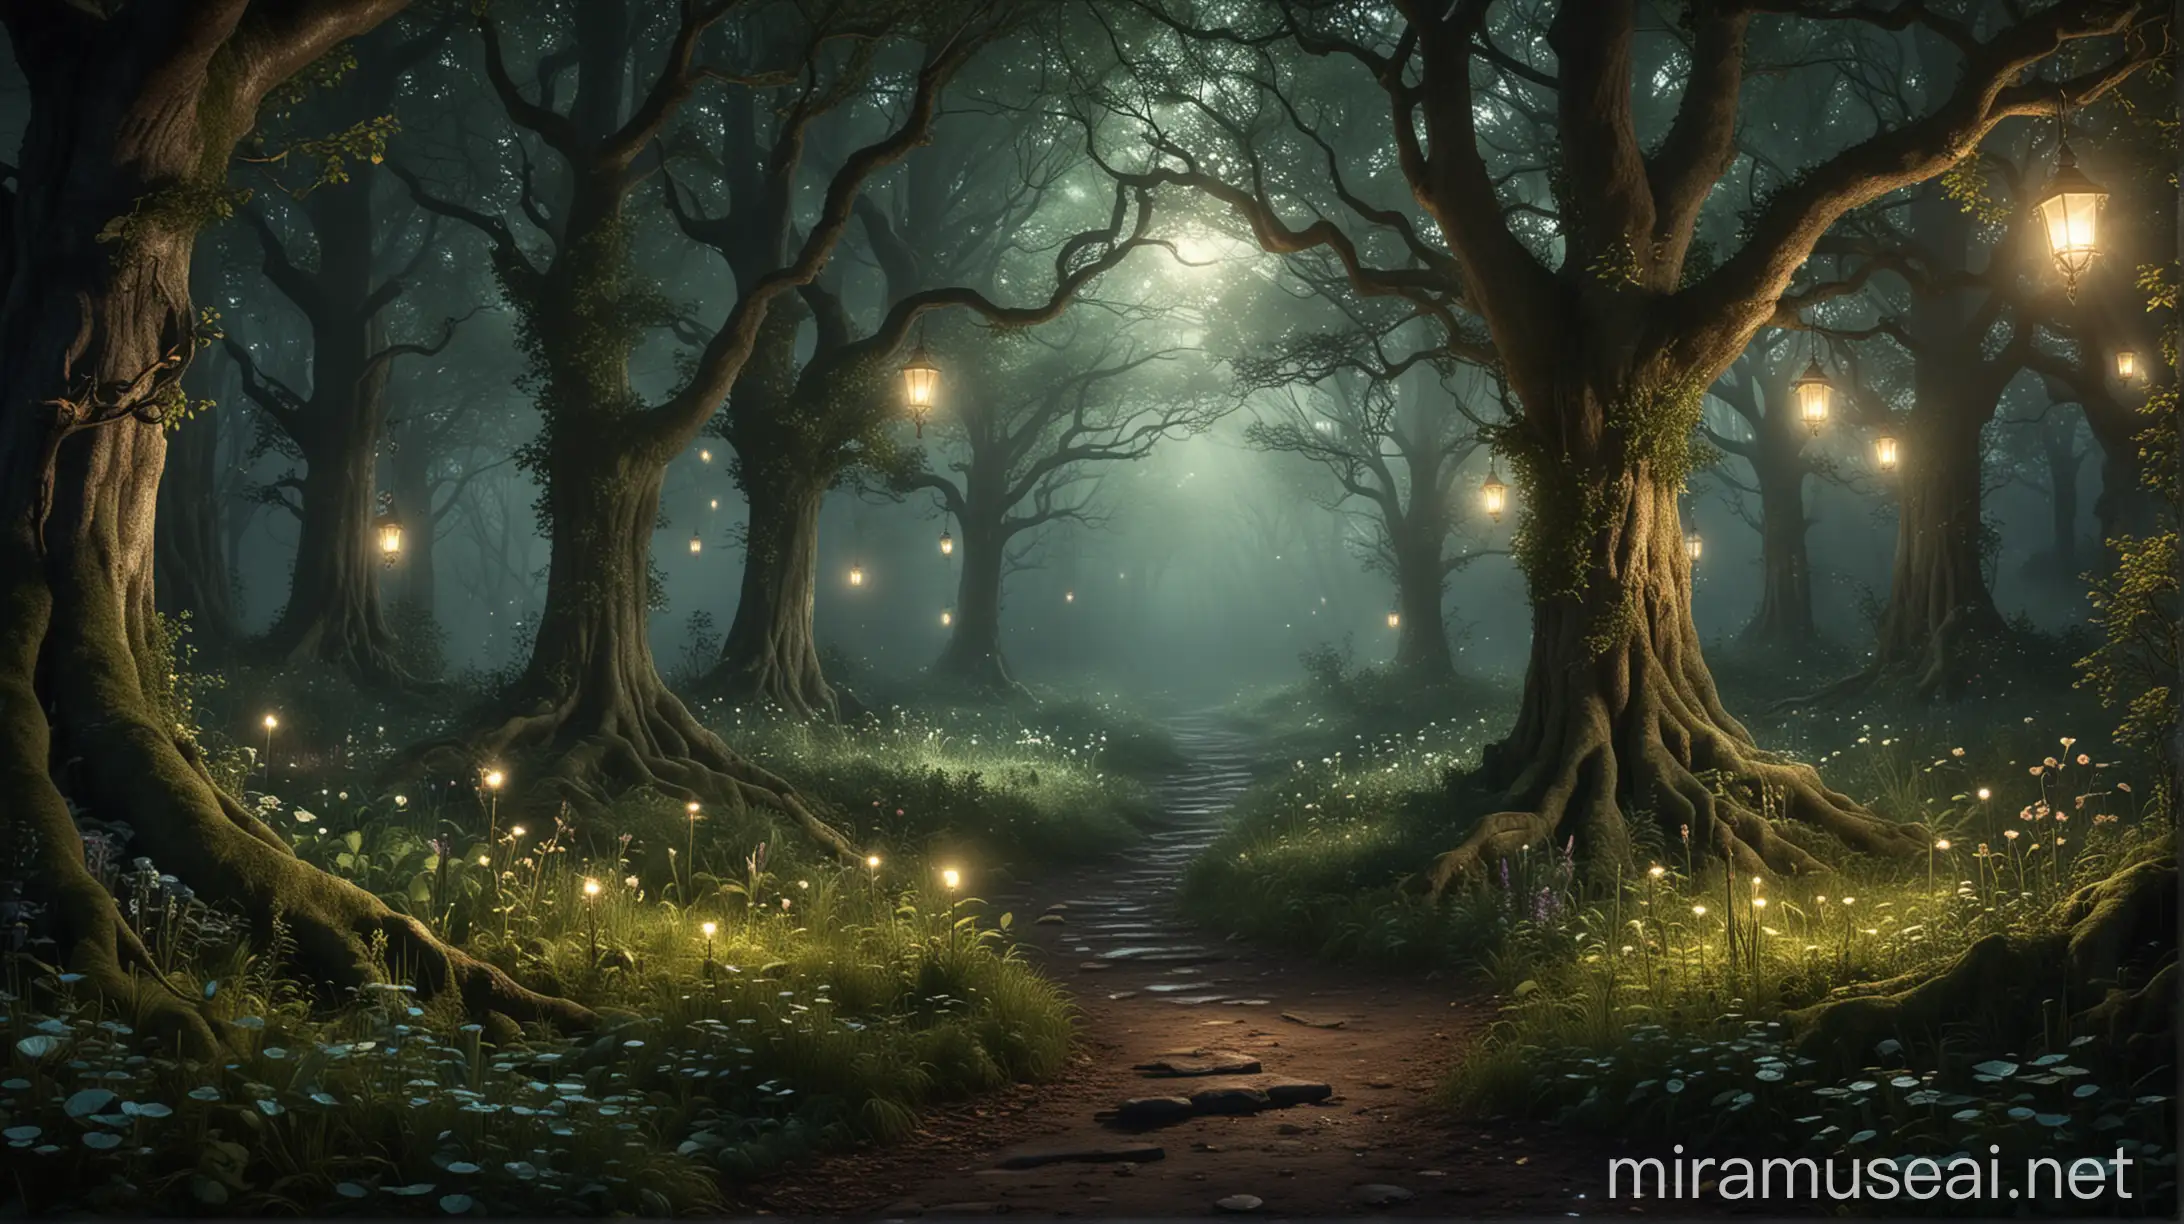 enchanted magical nocturnal glade